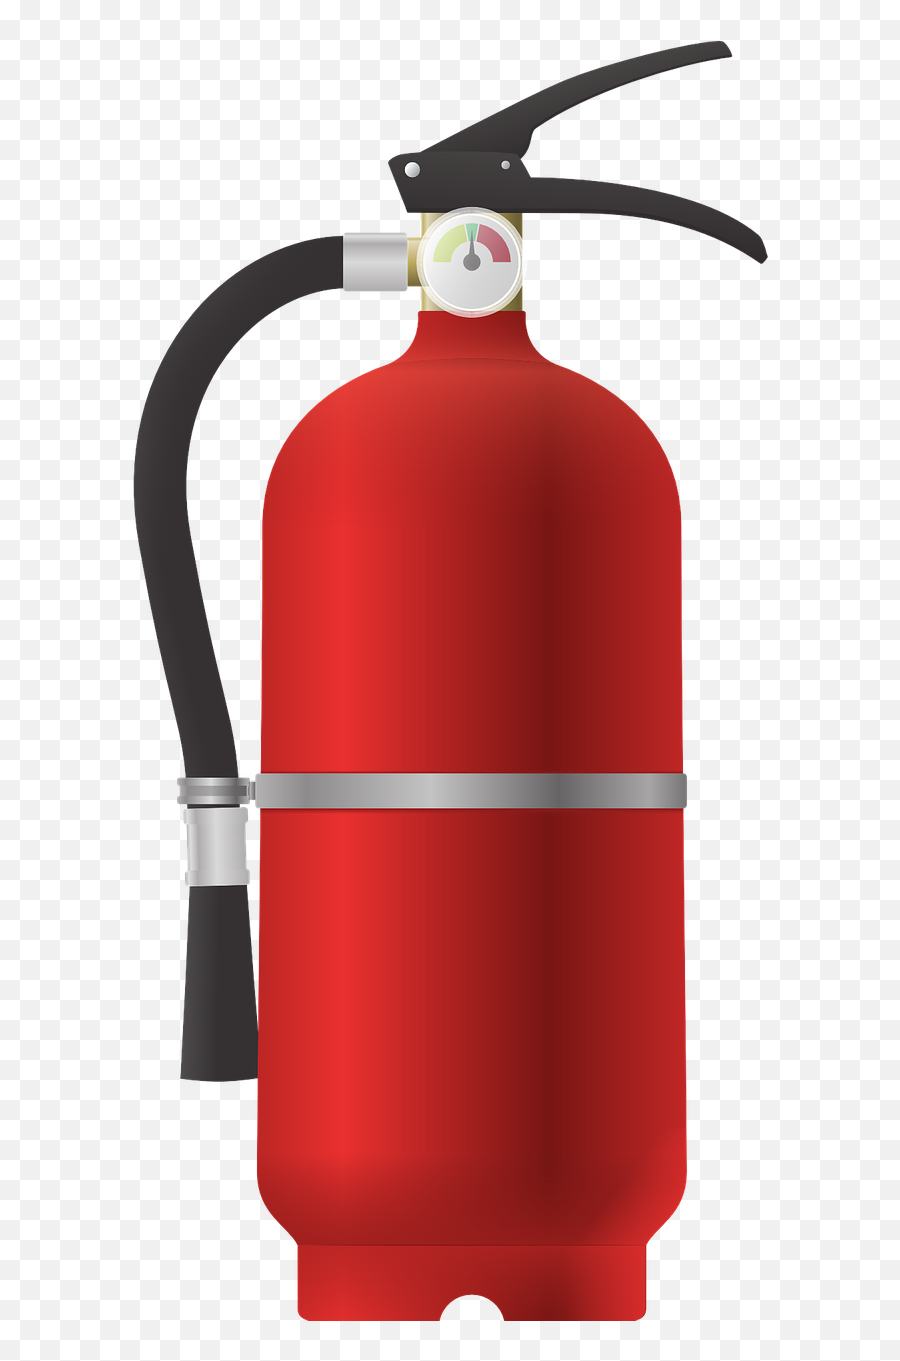 Collection Of Fire Extinguisher Images - Fire Extinguisher Clipart Transparent Emoji,Fire Extinguisher Emoji